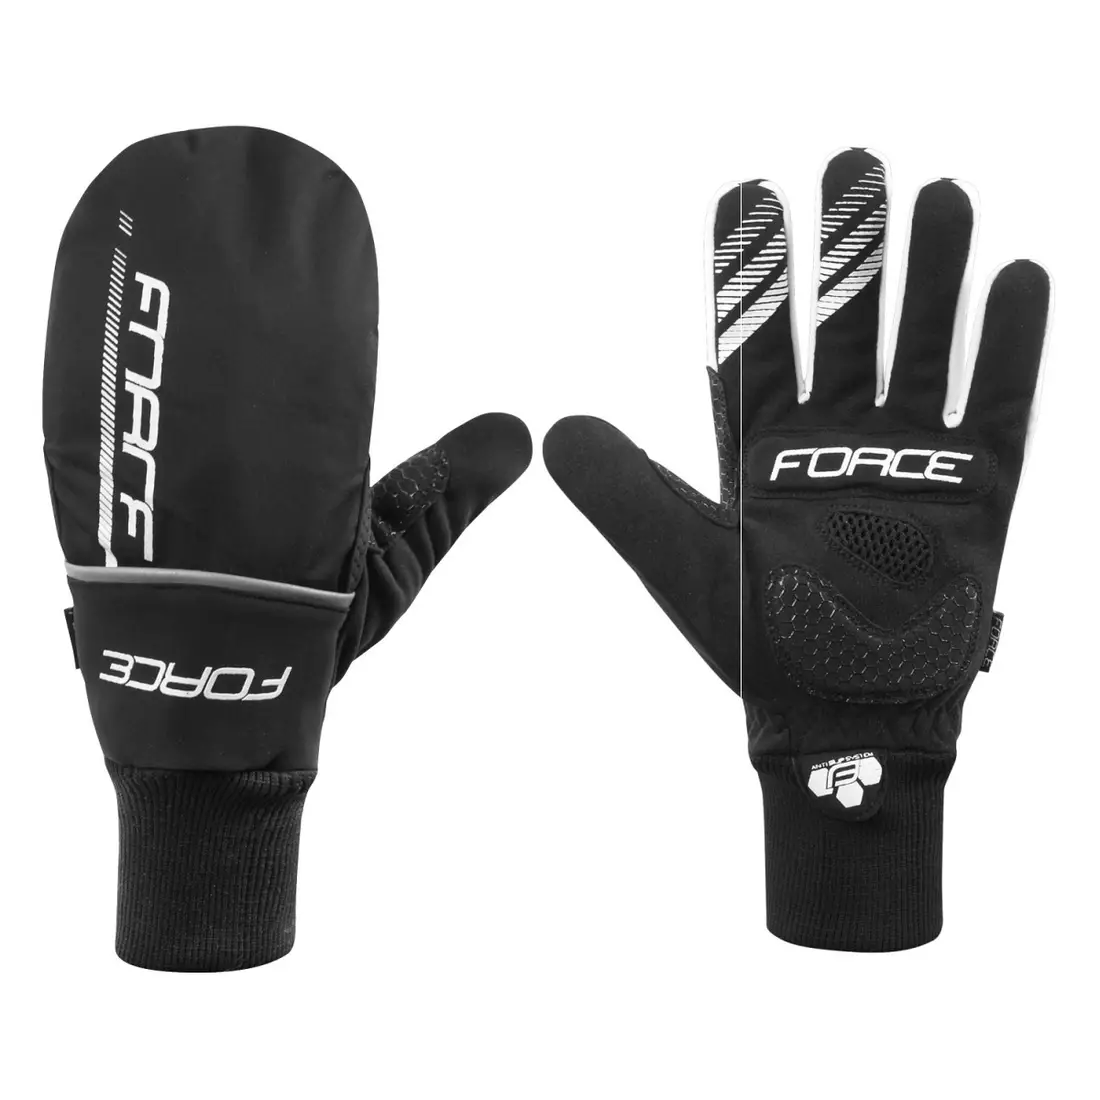 FORCE 90462 COVER winter cycling gloves, black